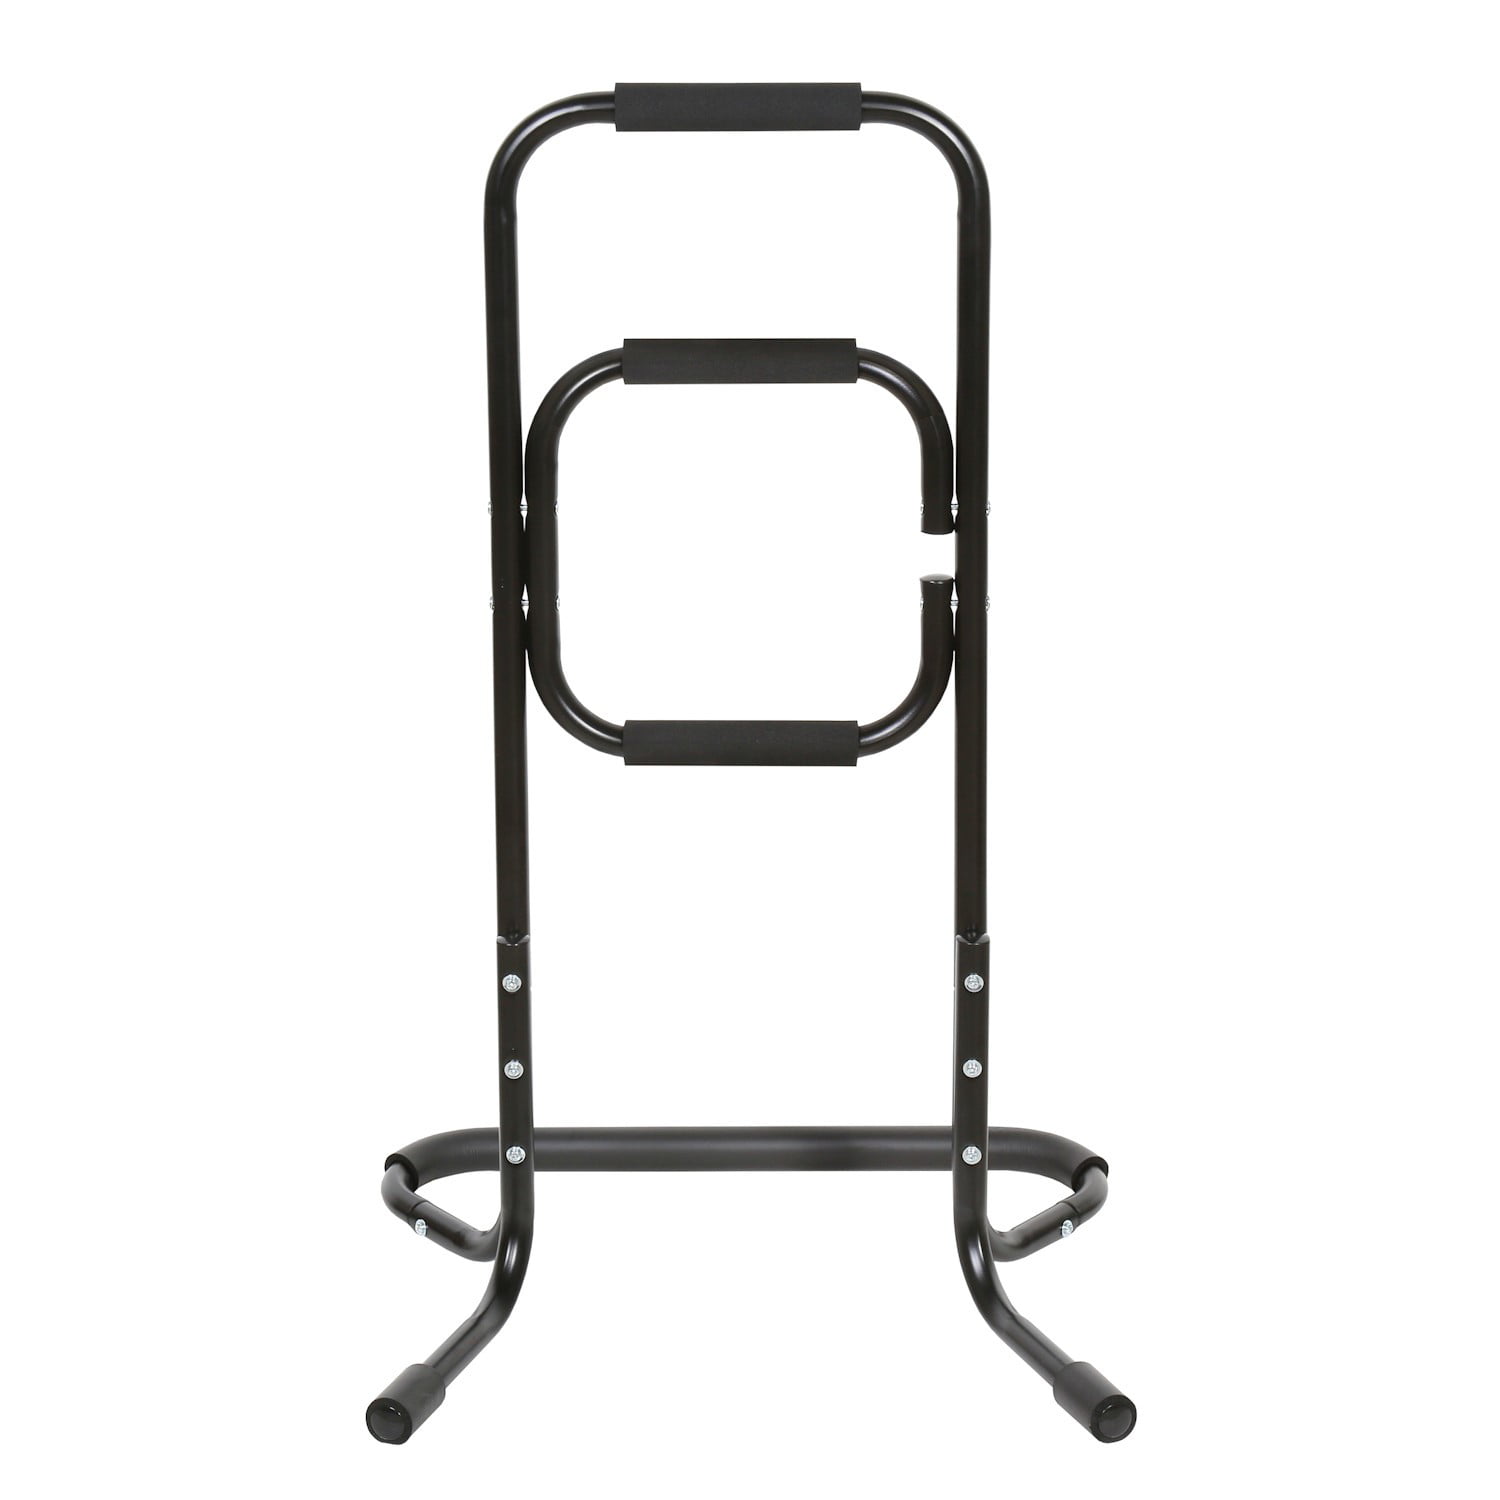 Bandwagon Portable Chair Assist Helps You Rise From Seated